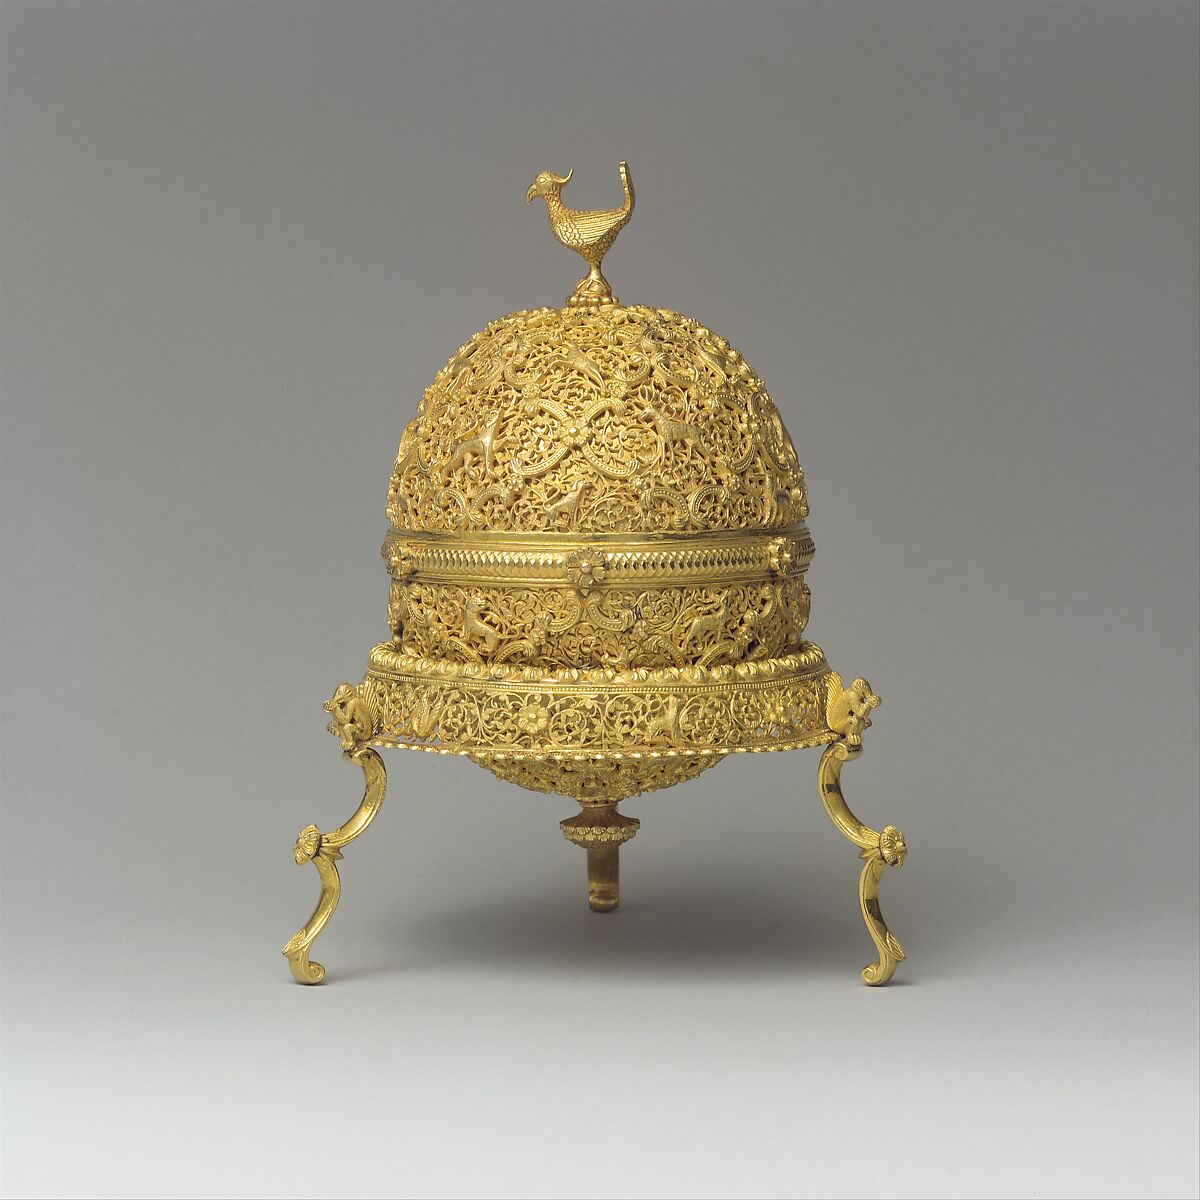 Goa Stone and Gold Case, Container: gold; pierced, repoussé, with cast legs and finials
Goa stone: compound of organic and inorganic materials 